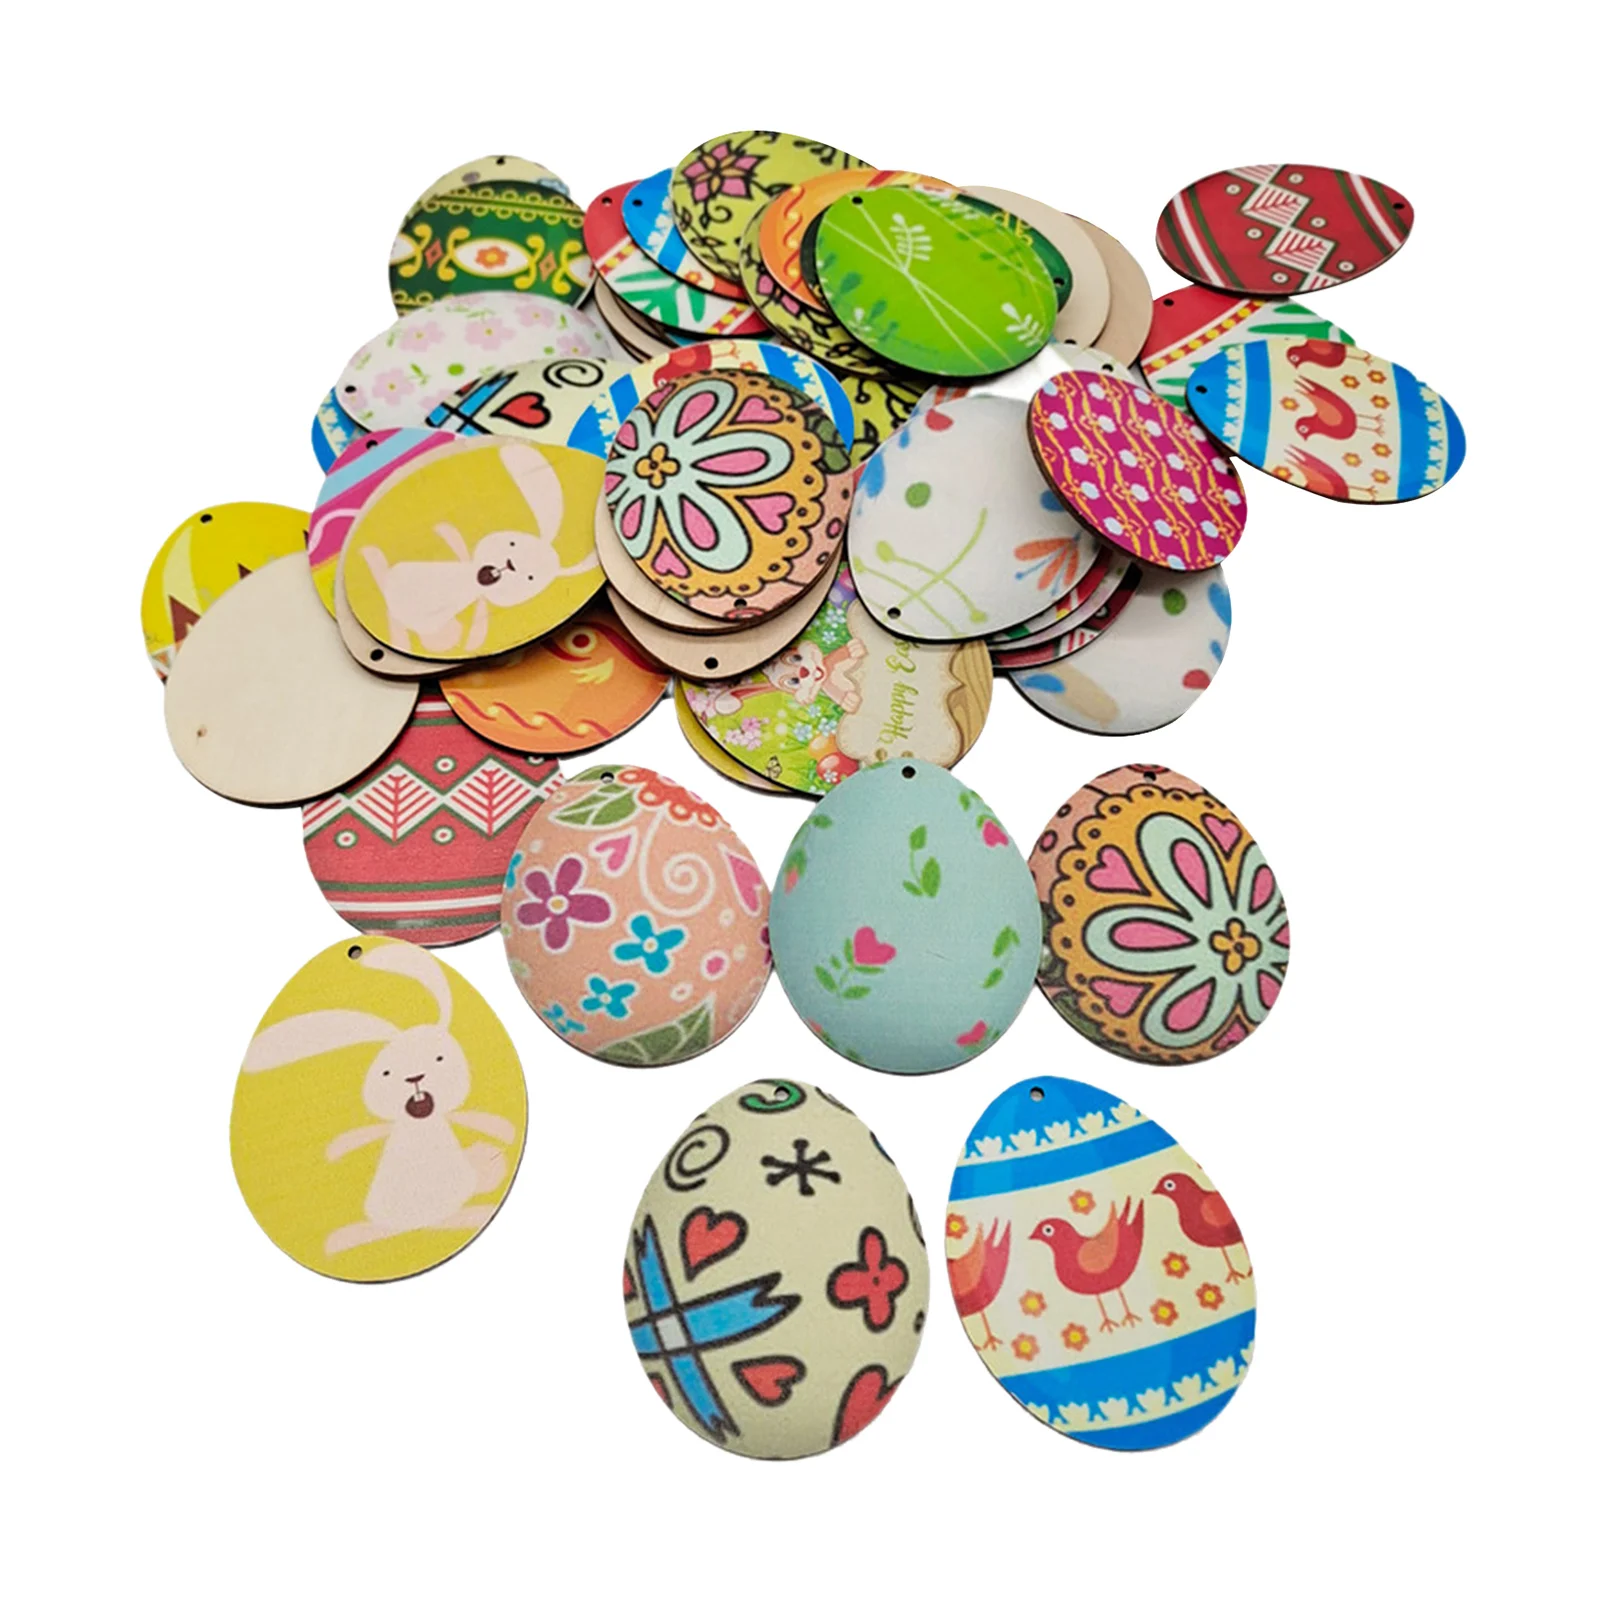 50 Pieces Color Ful Easter Wooden Ornaments for Crafts Easter Egg Wood